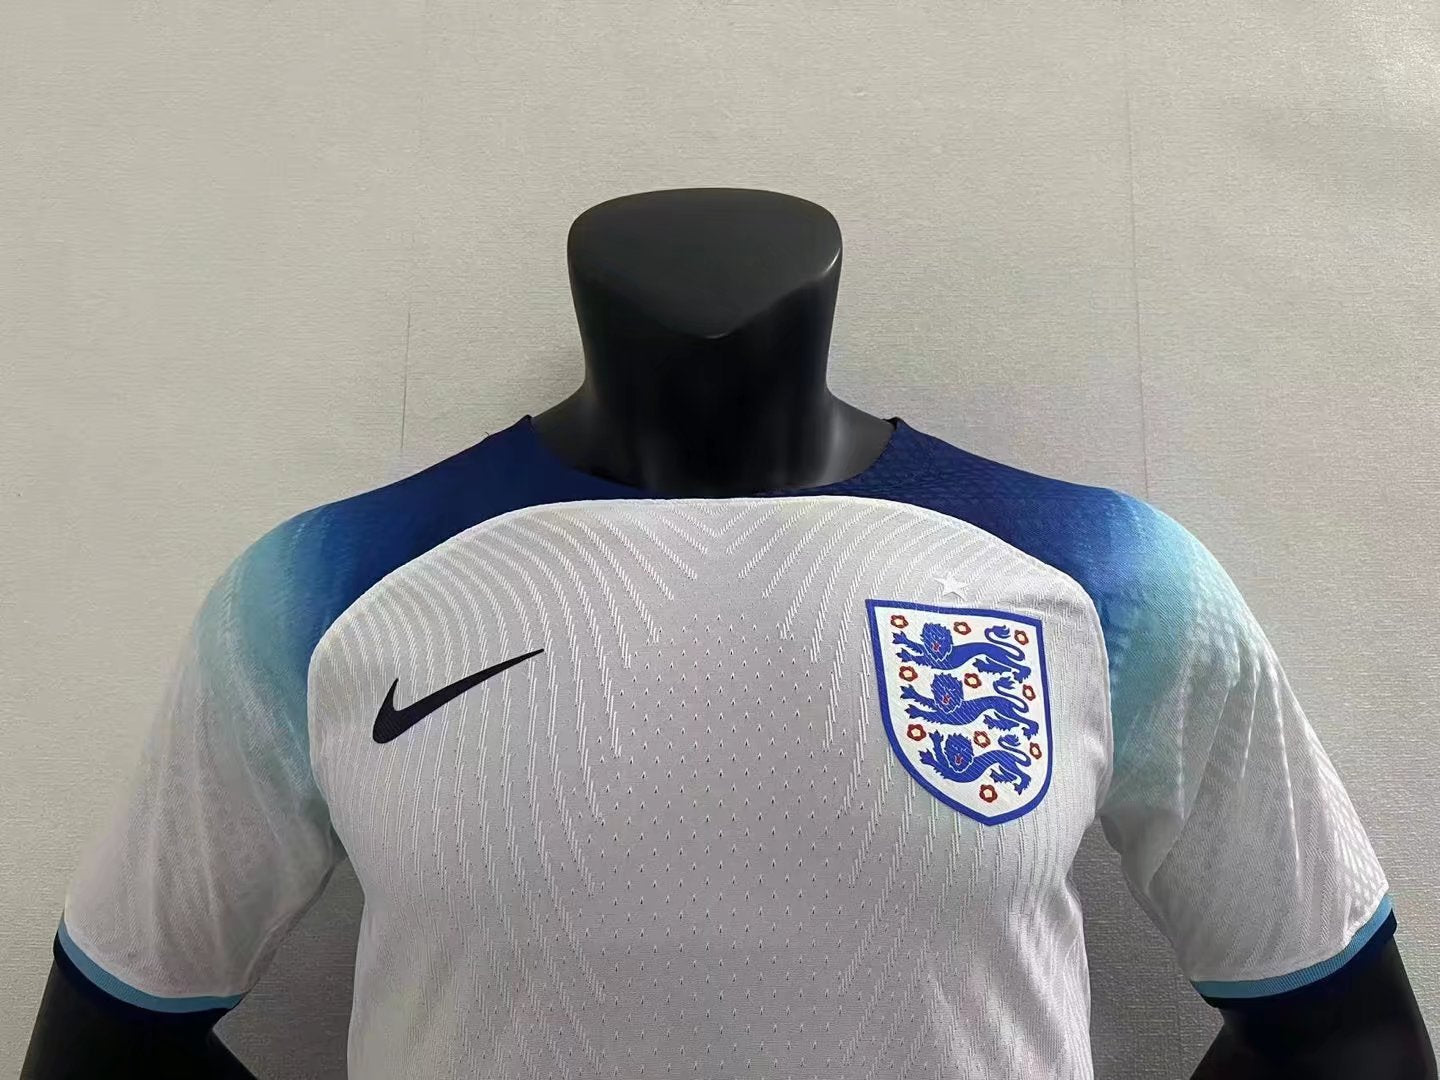 Marcus Rashford England National Team 2022/23 Nike On-Field Player Version Authentic Home Soccer Jersey - White